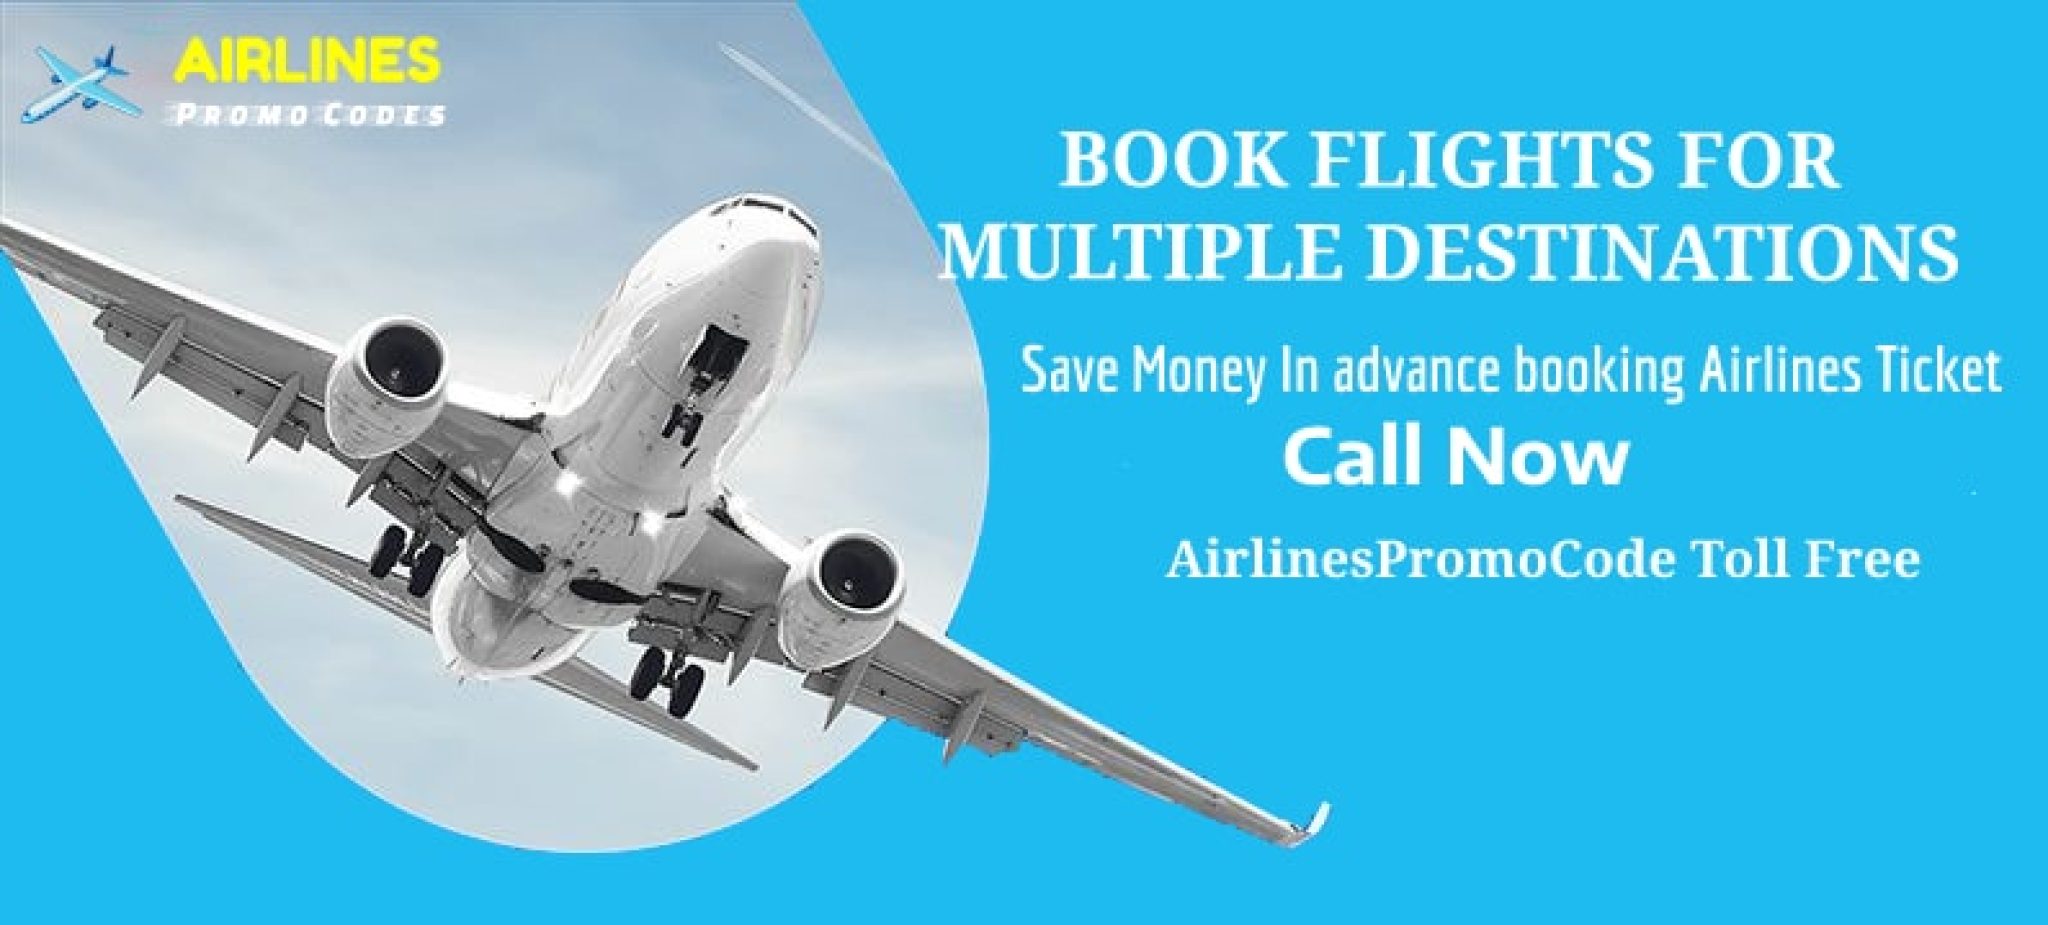 booking a trip with multiple destinations